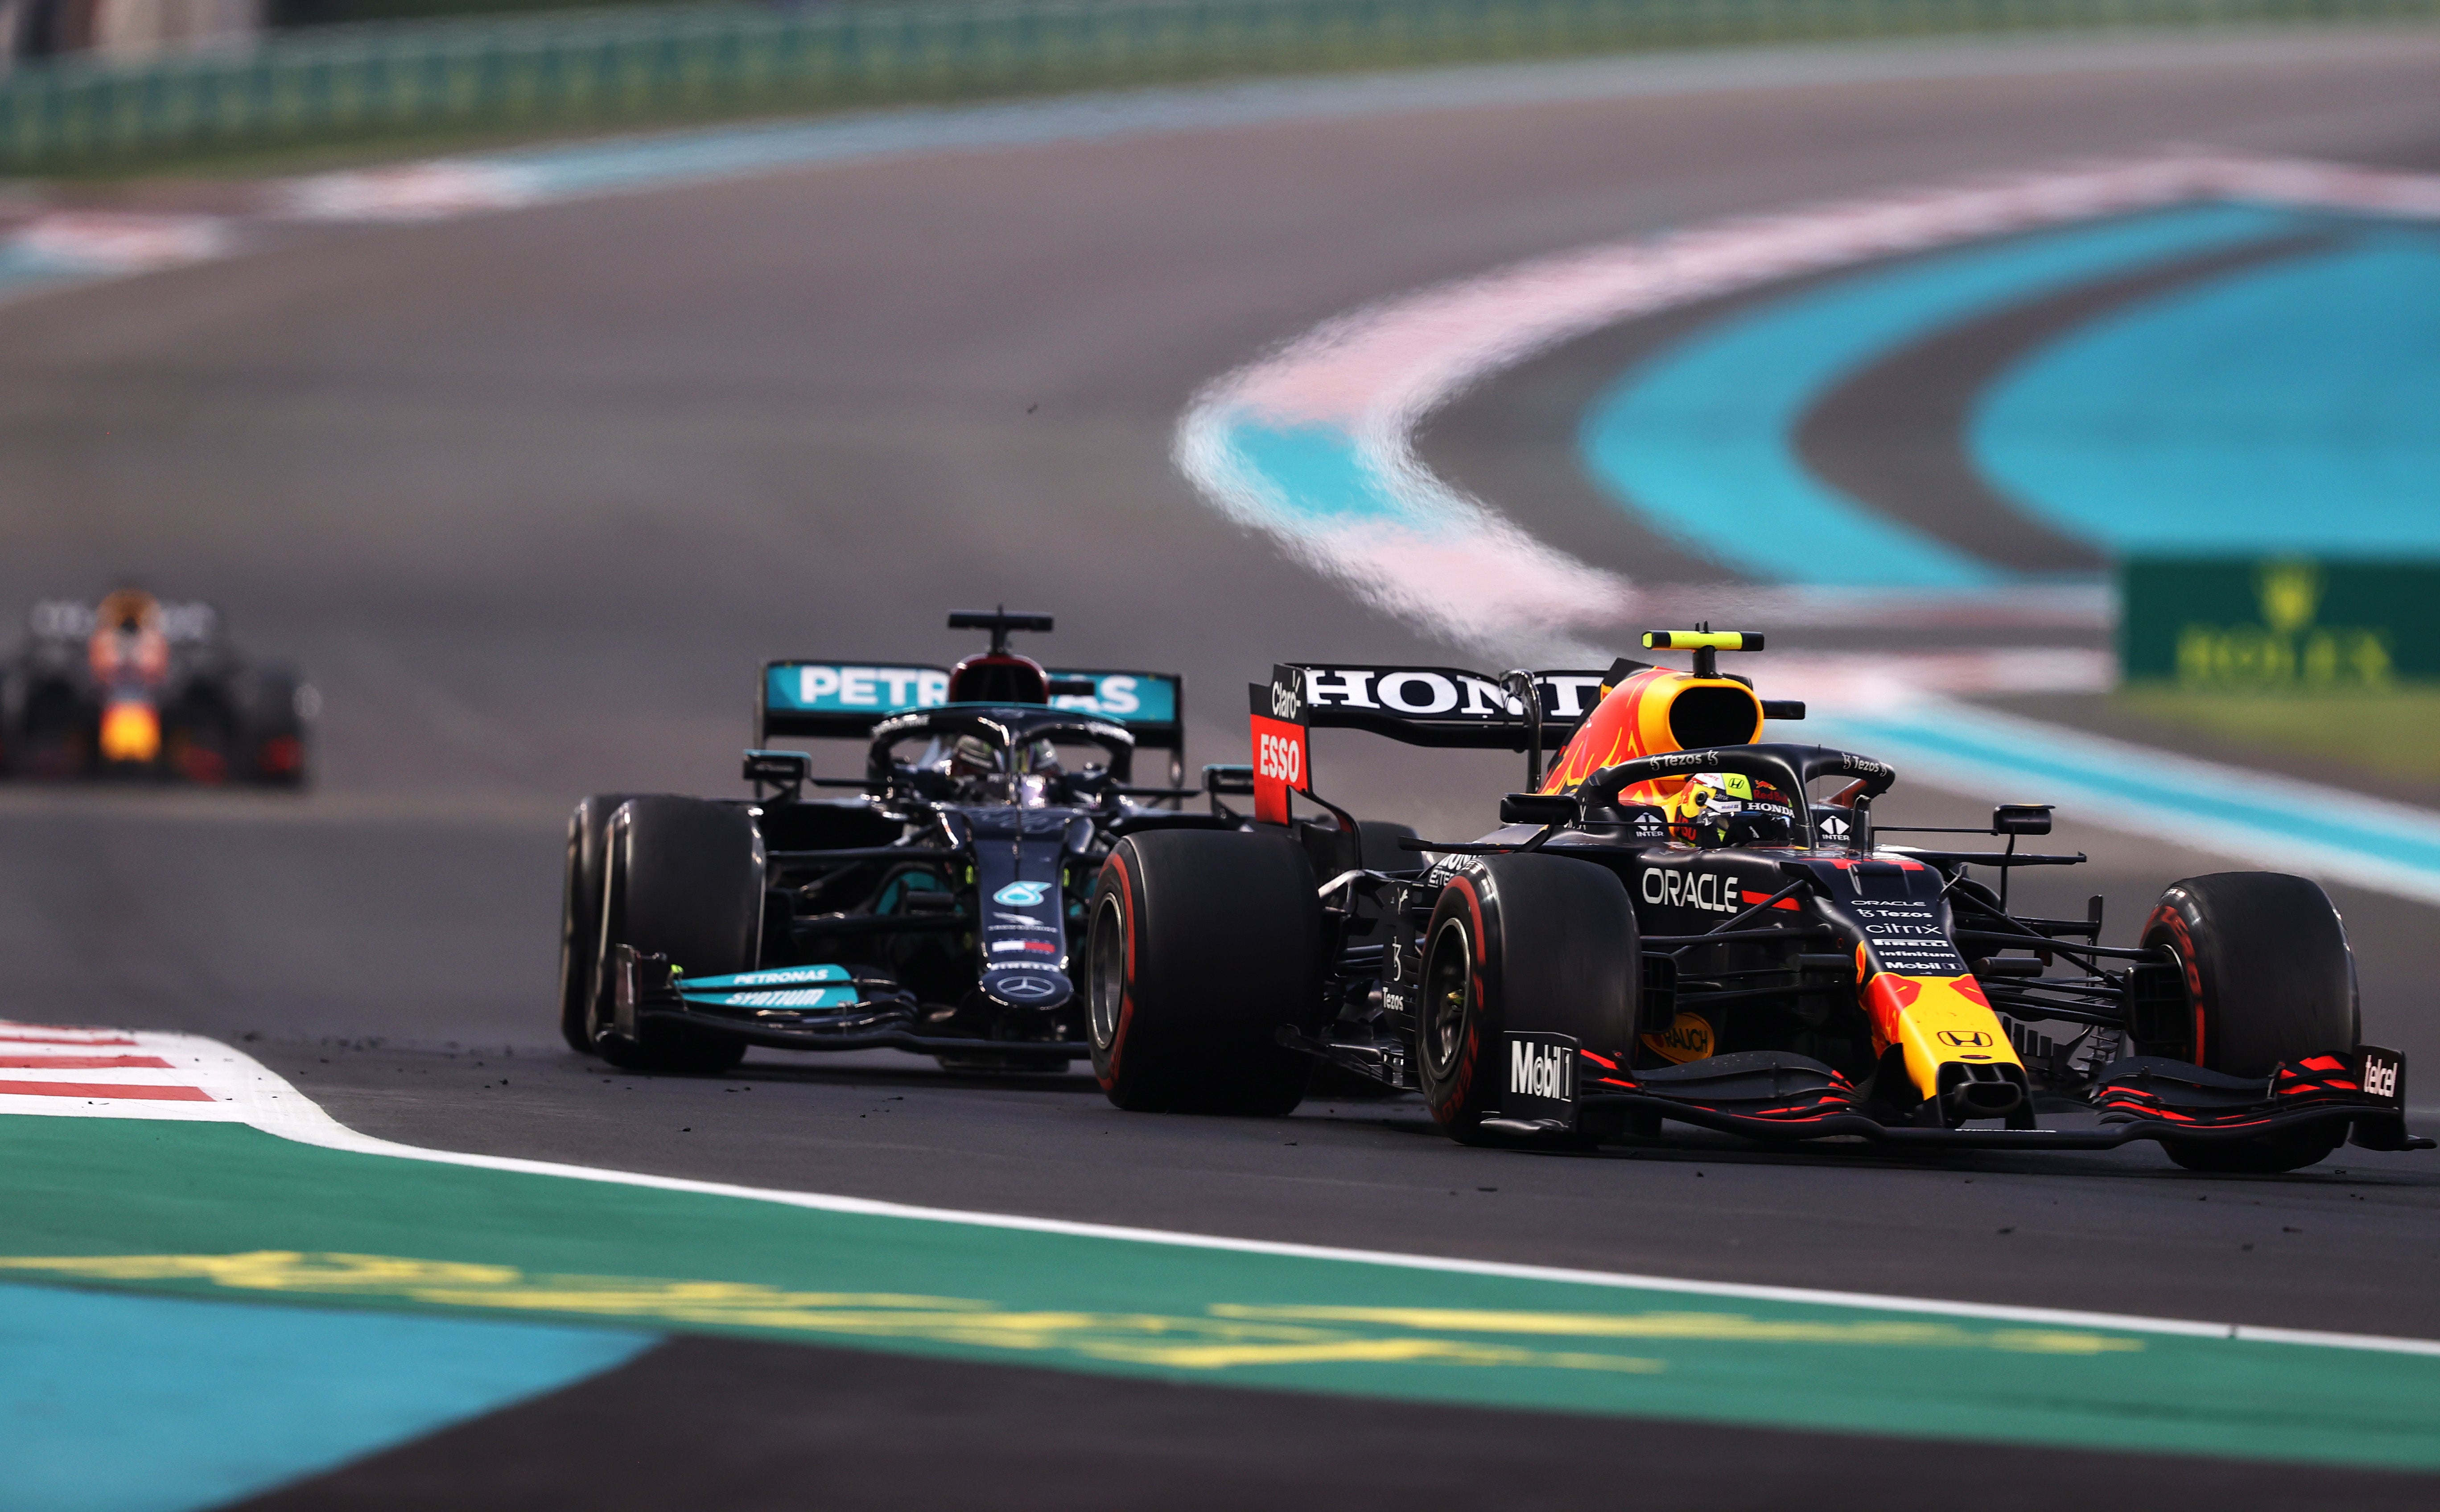 Sergio Perez defends against Hamilton – with Verstappen creeping up in the background